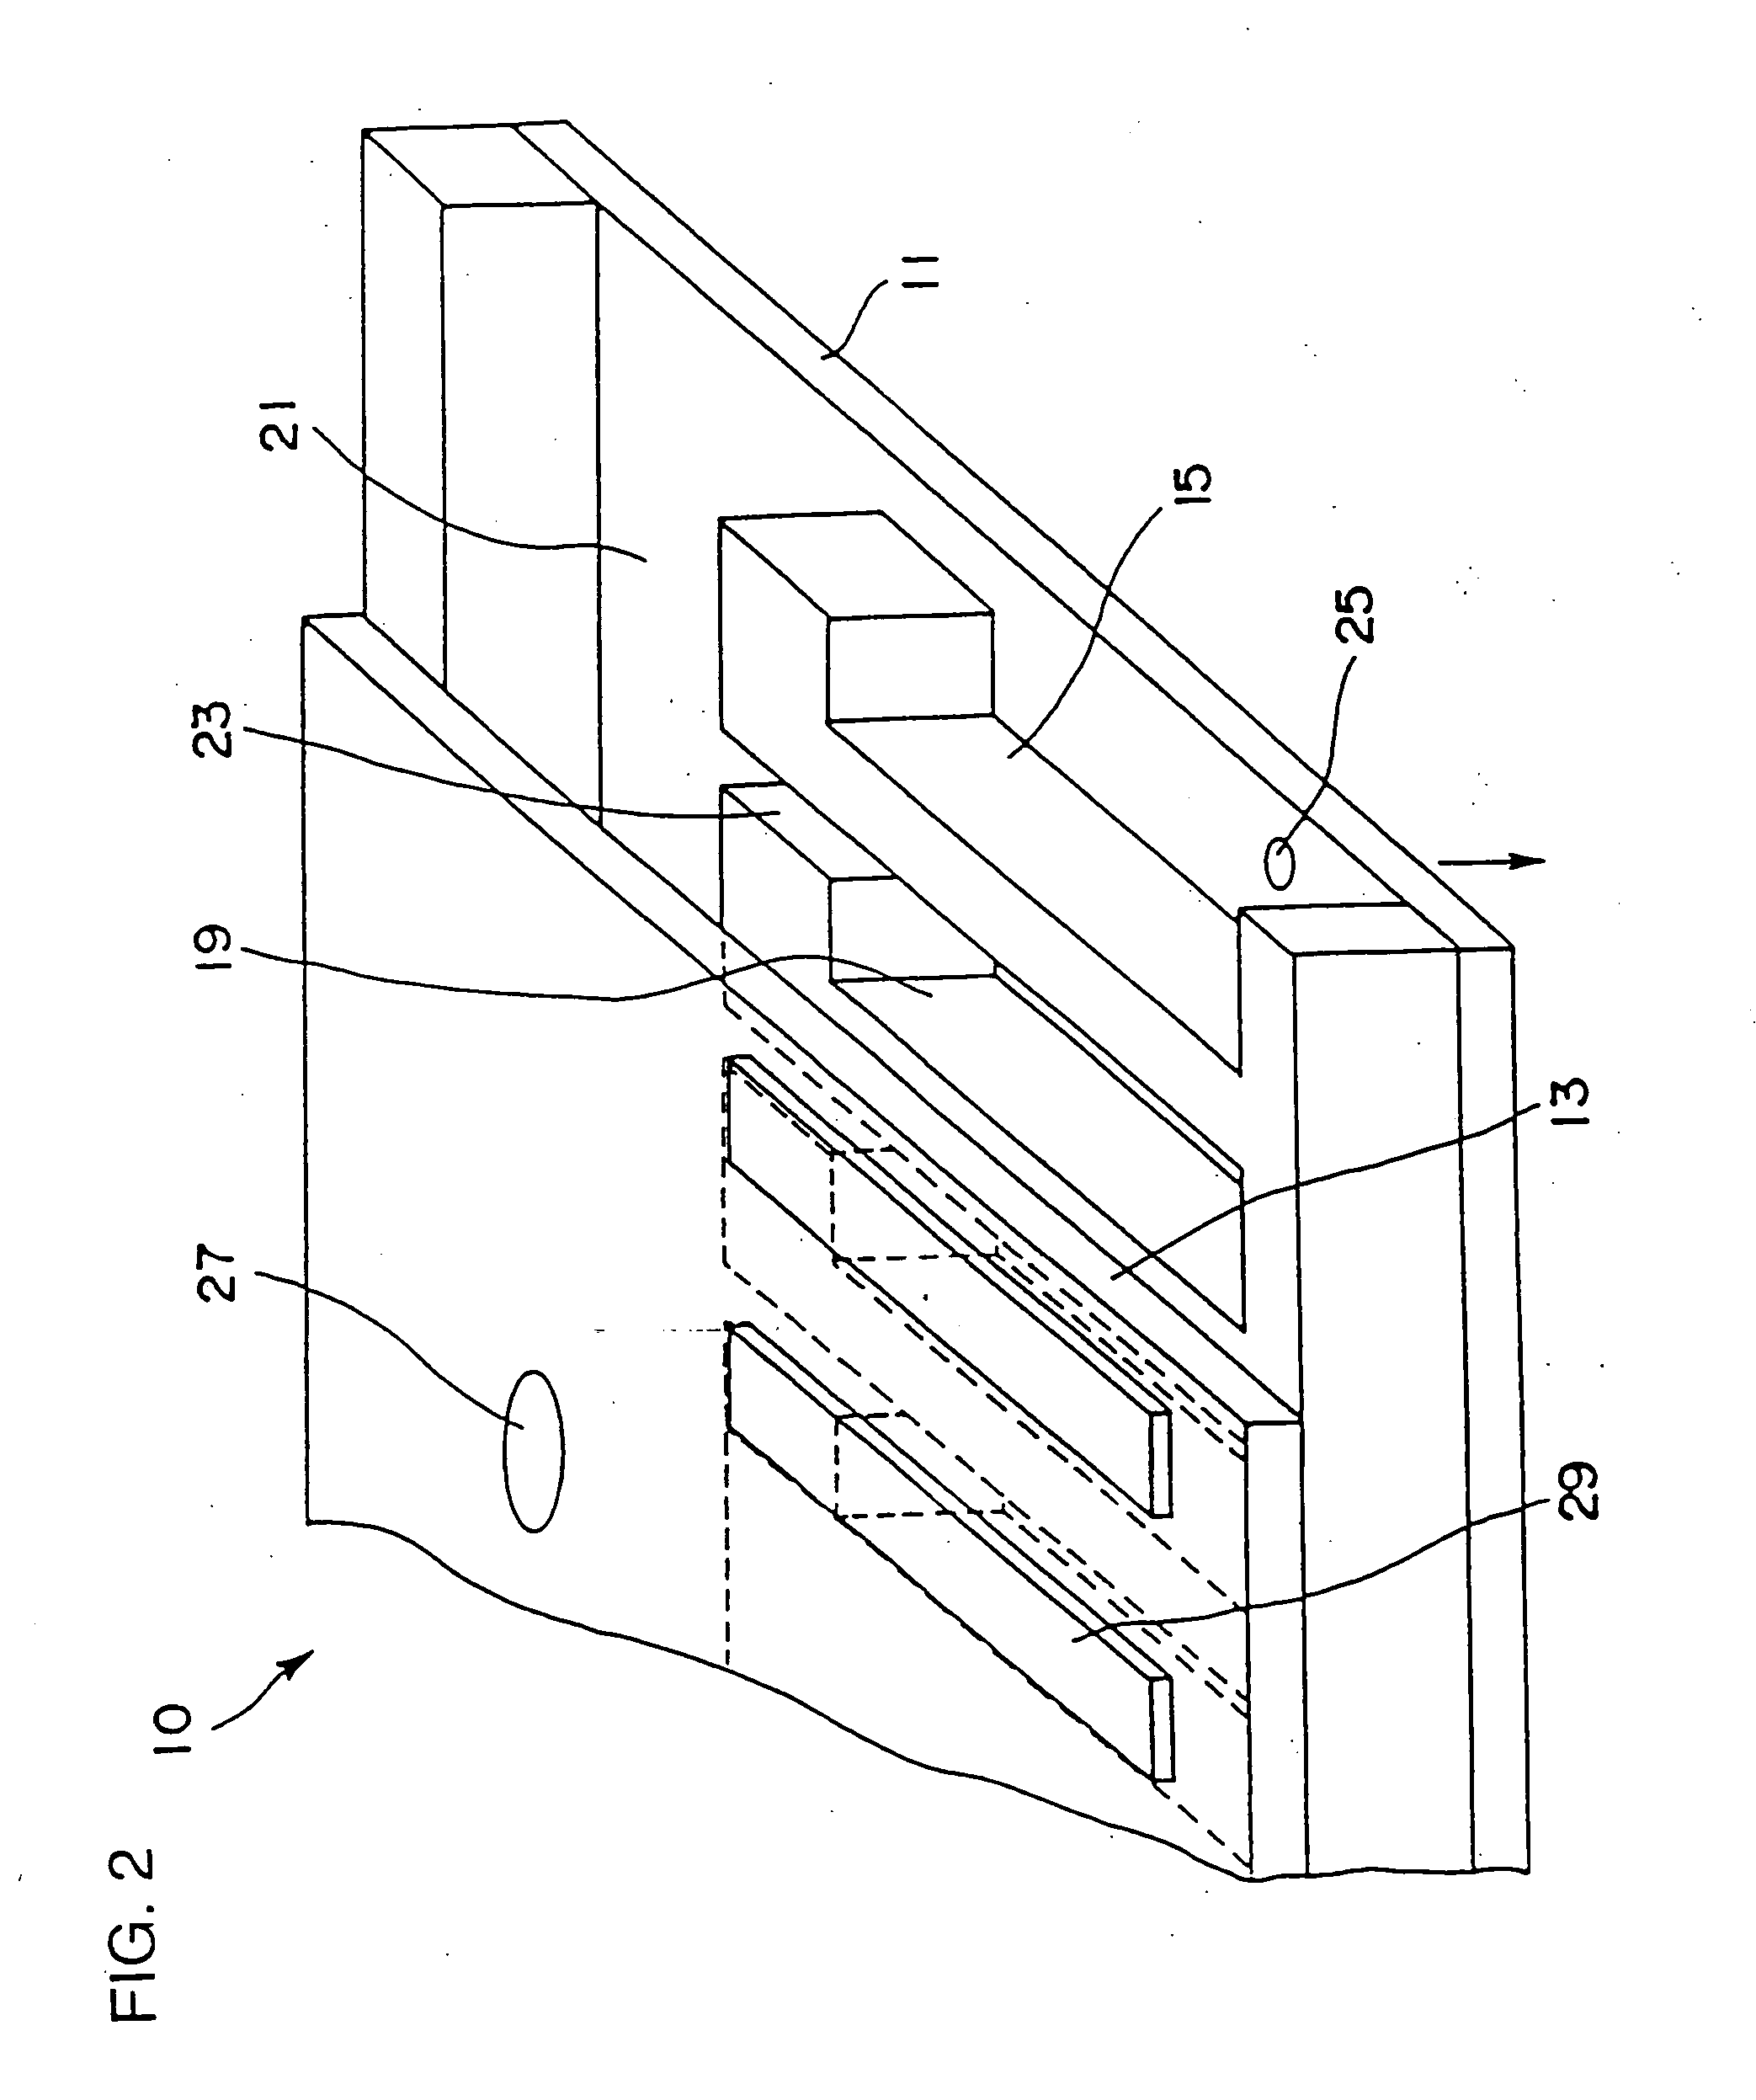 Composition for an organic el element and method of manufacturing the organic EL element